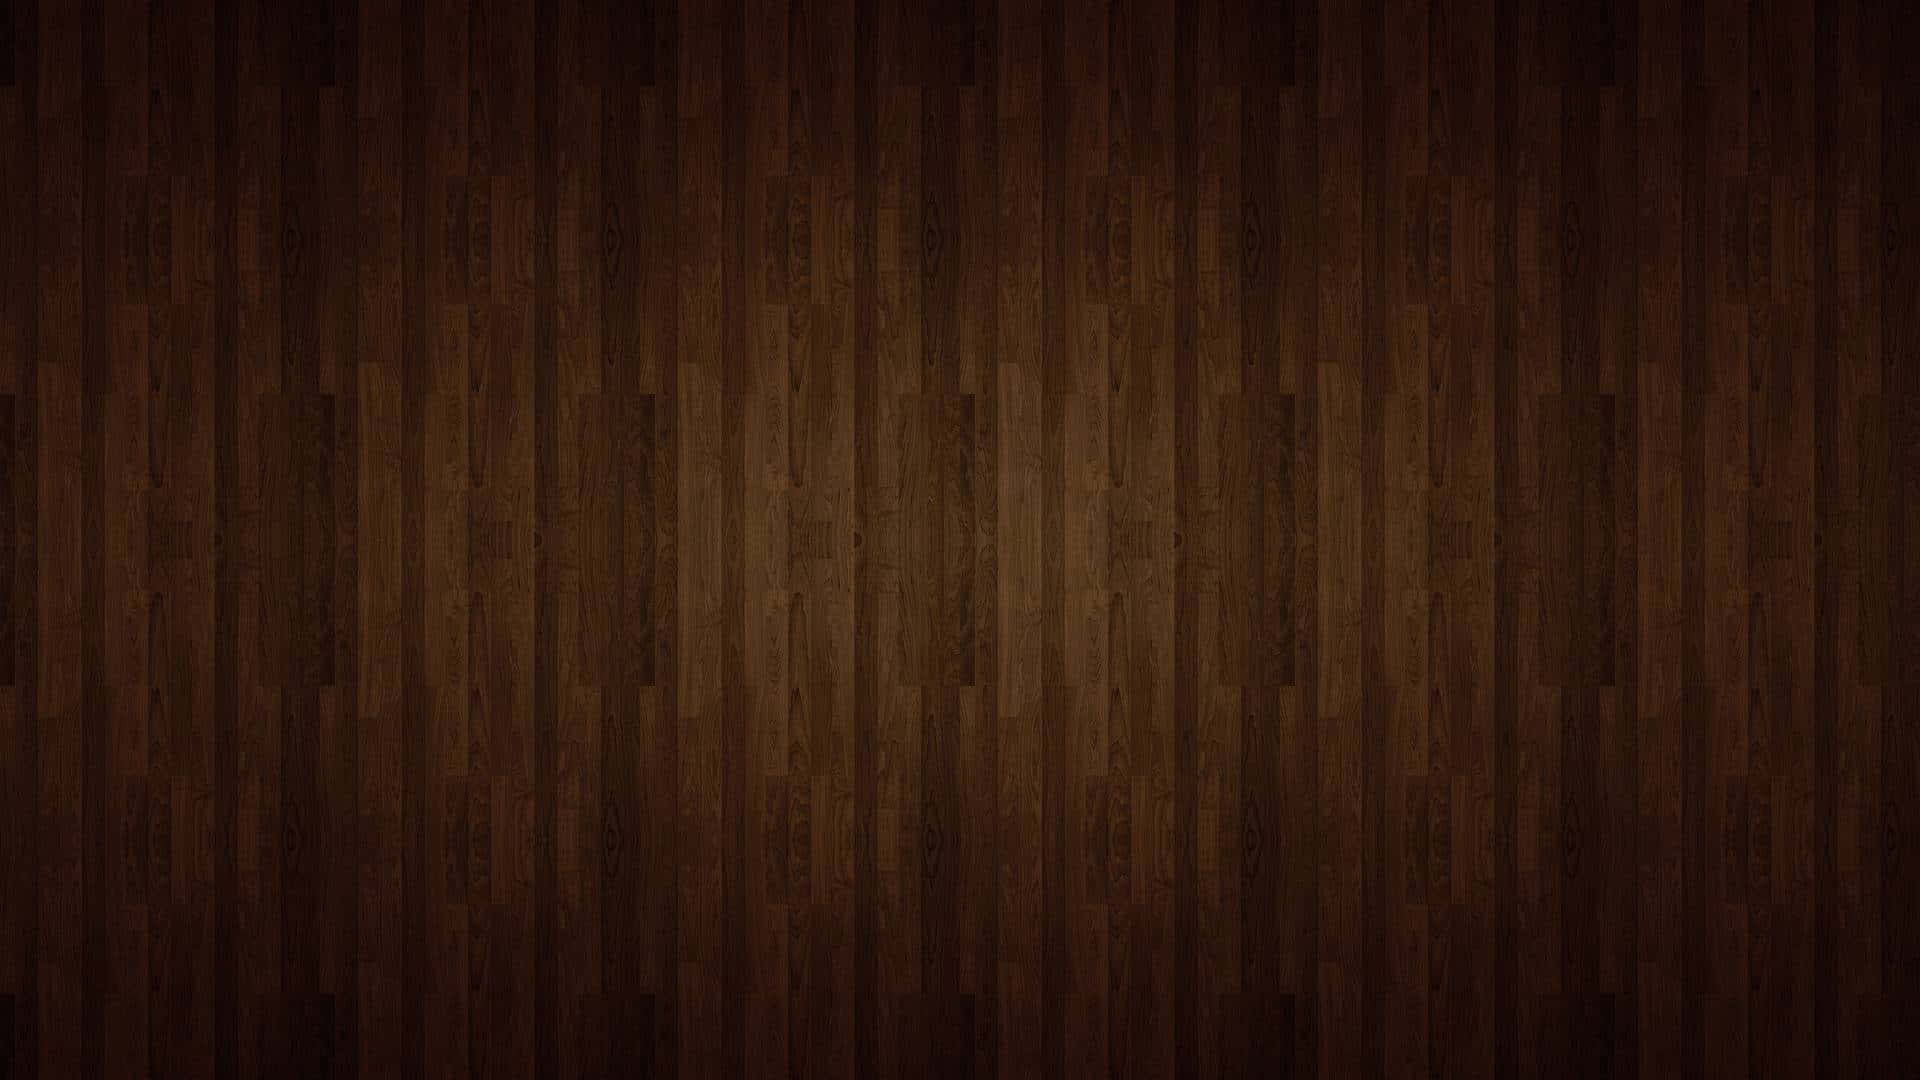 A Dark Wood Background With A Dark Brown Color